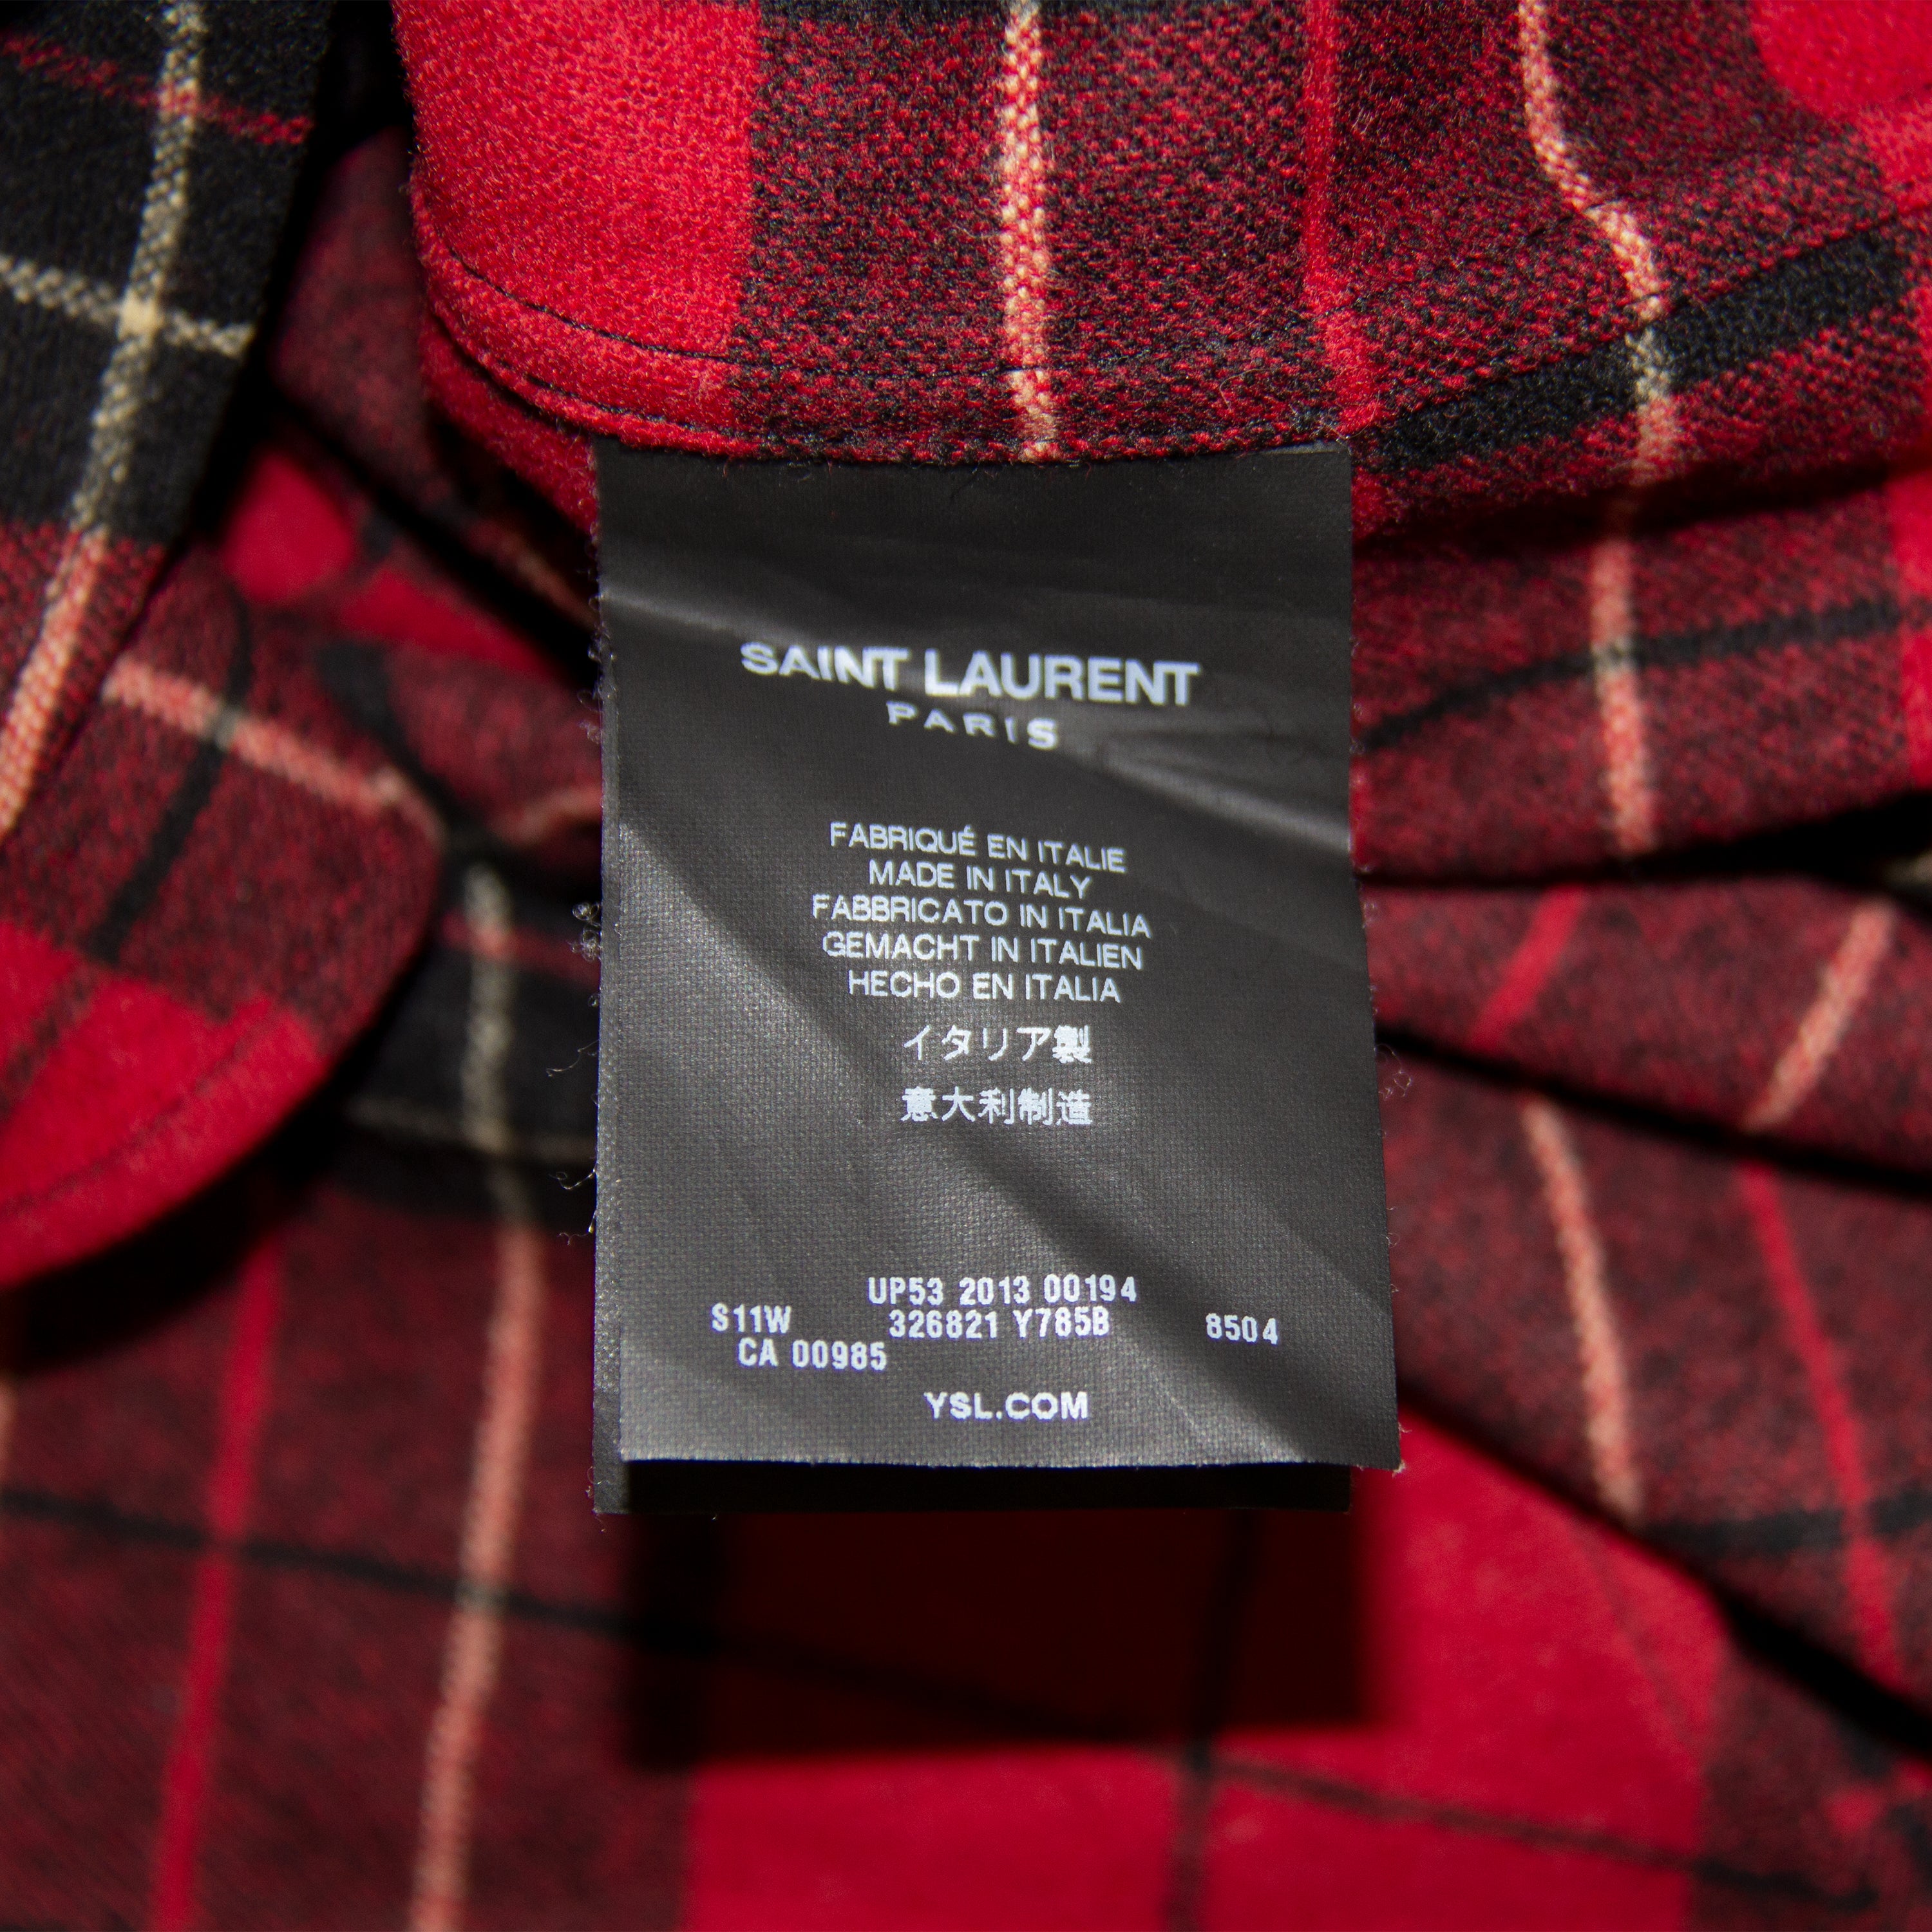 AW13 RUNWAY FLANNEL